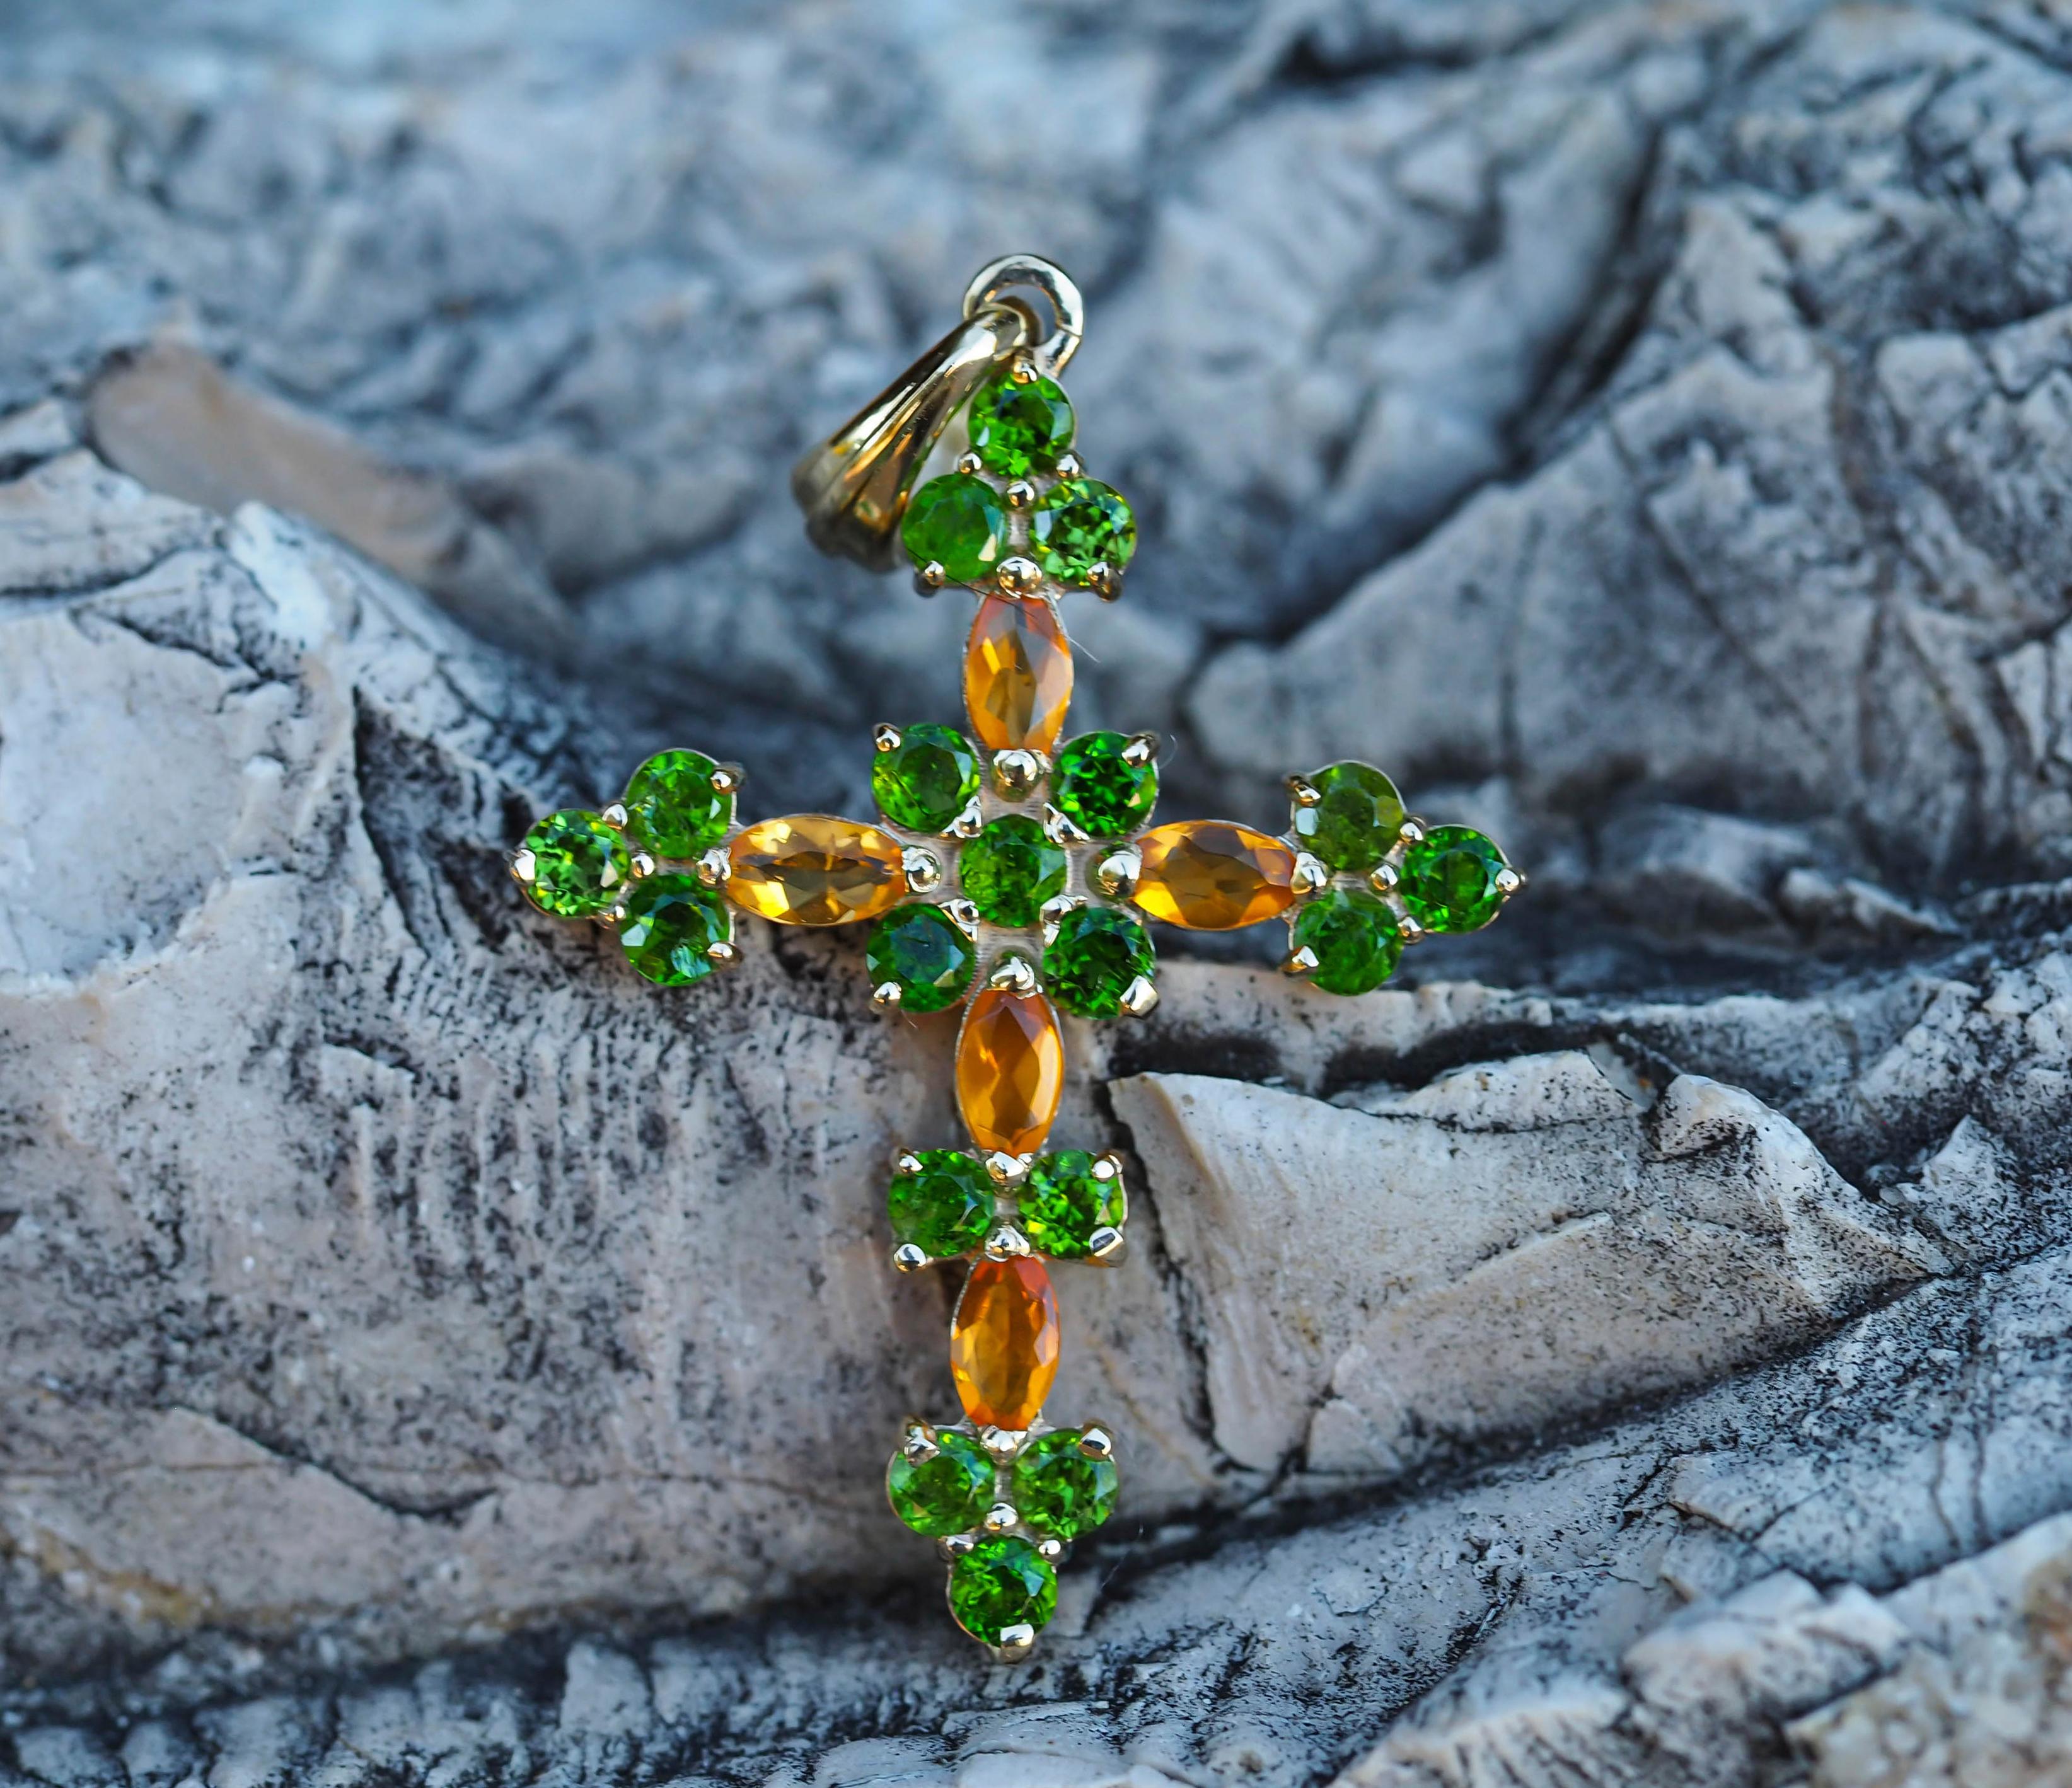 14 kt solid gold Cross pendant with natural opals and chrome diopsides. October birthstone.
Metal: 14kt solid gold
Pendant size: 31.5 x 19.3 mm.
Weight: 1.9 g.

Gemstones:
Natural opals: 5 pieces, weight - 0.70 ct total (0.14 ct x 5 pieces)
Marquise